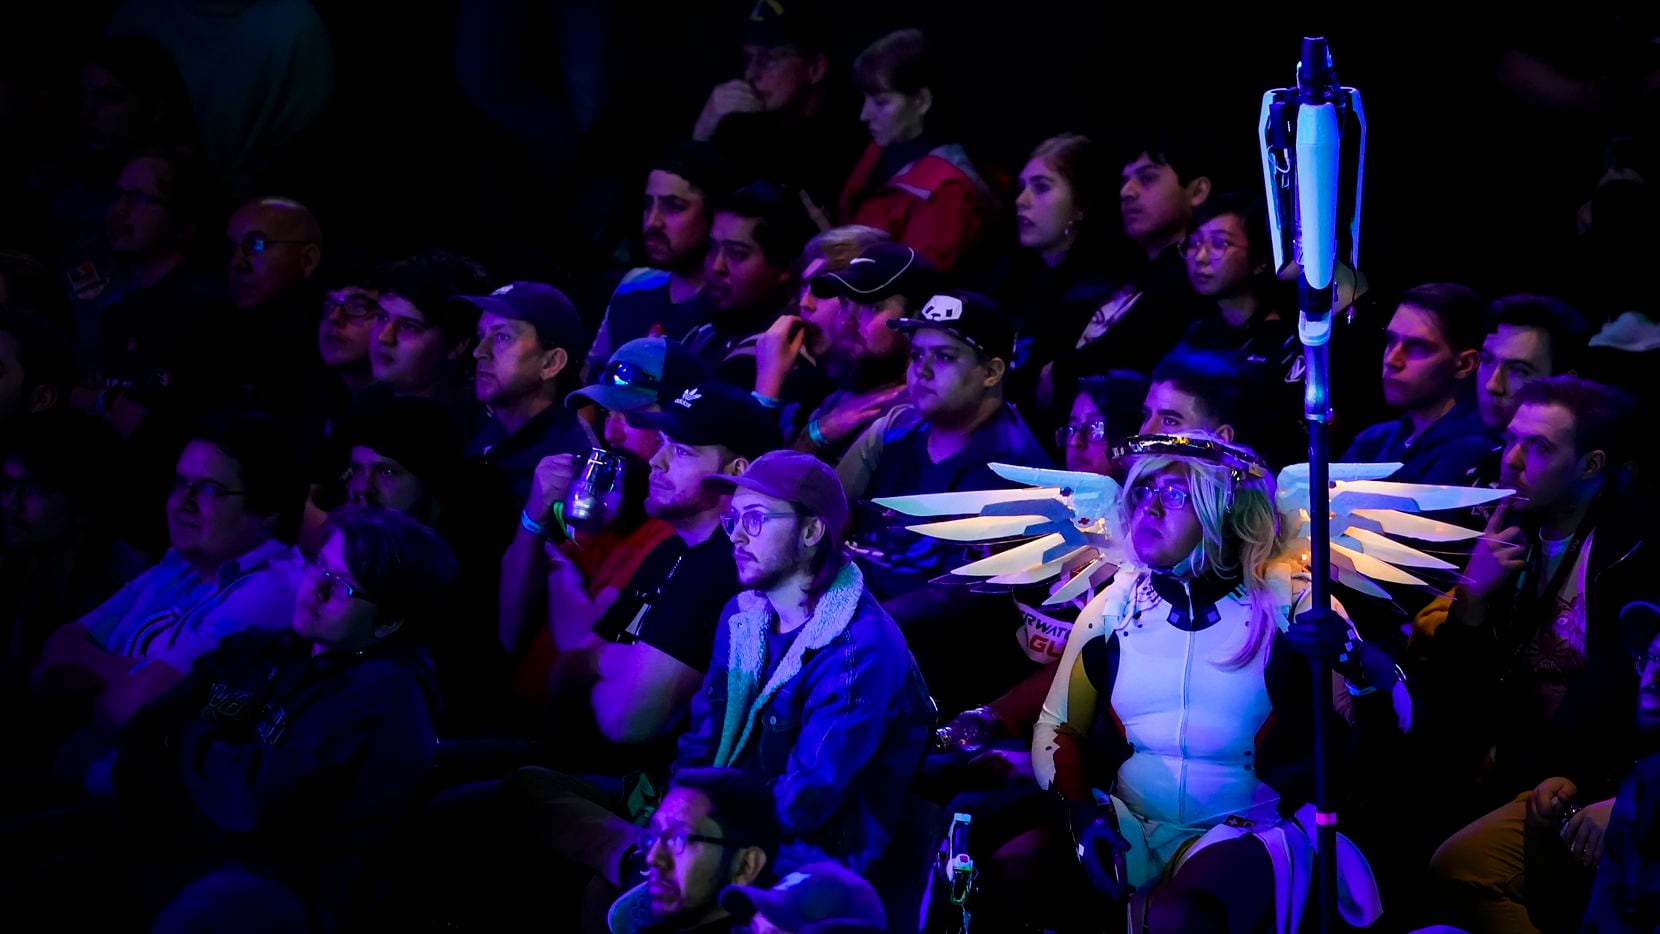 Dallas Fuel fans watch during a Overwatch League match against the Los Angeles Valiant at the Arlington Esports Stadium on Saturday, Feb. 8, 2020, in Arlington.